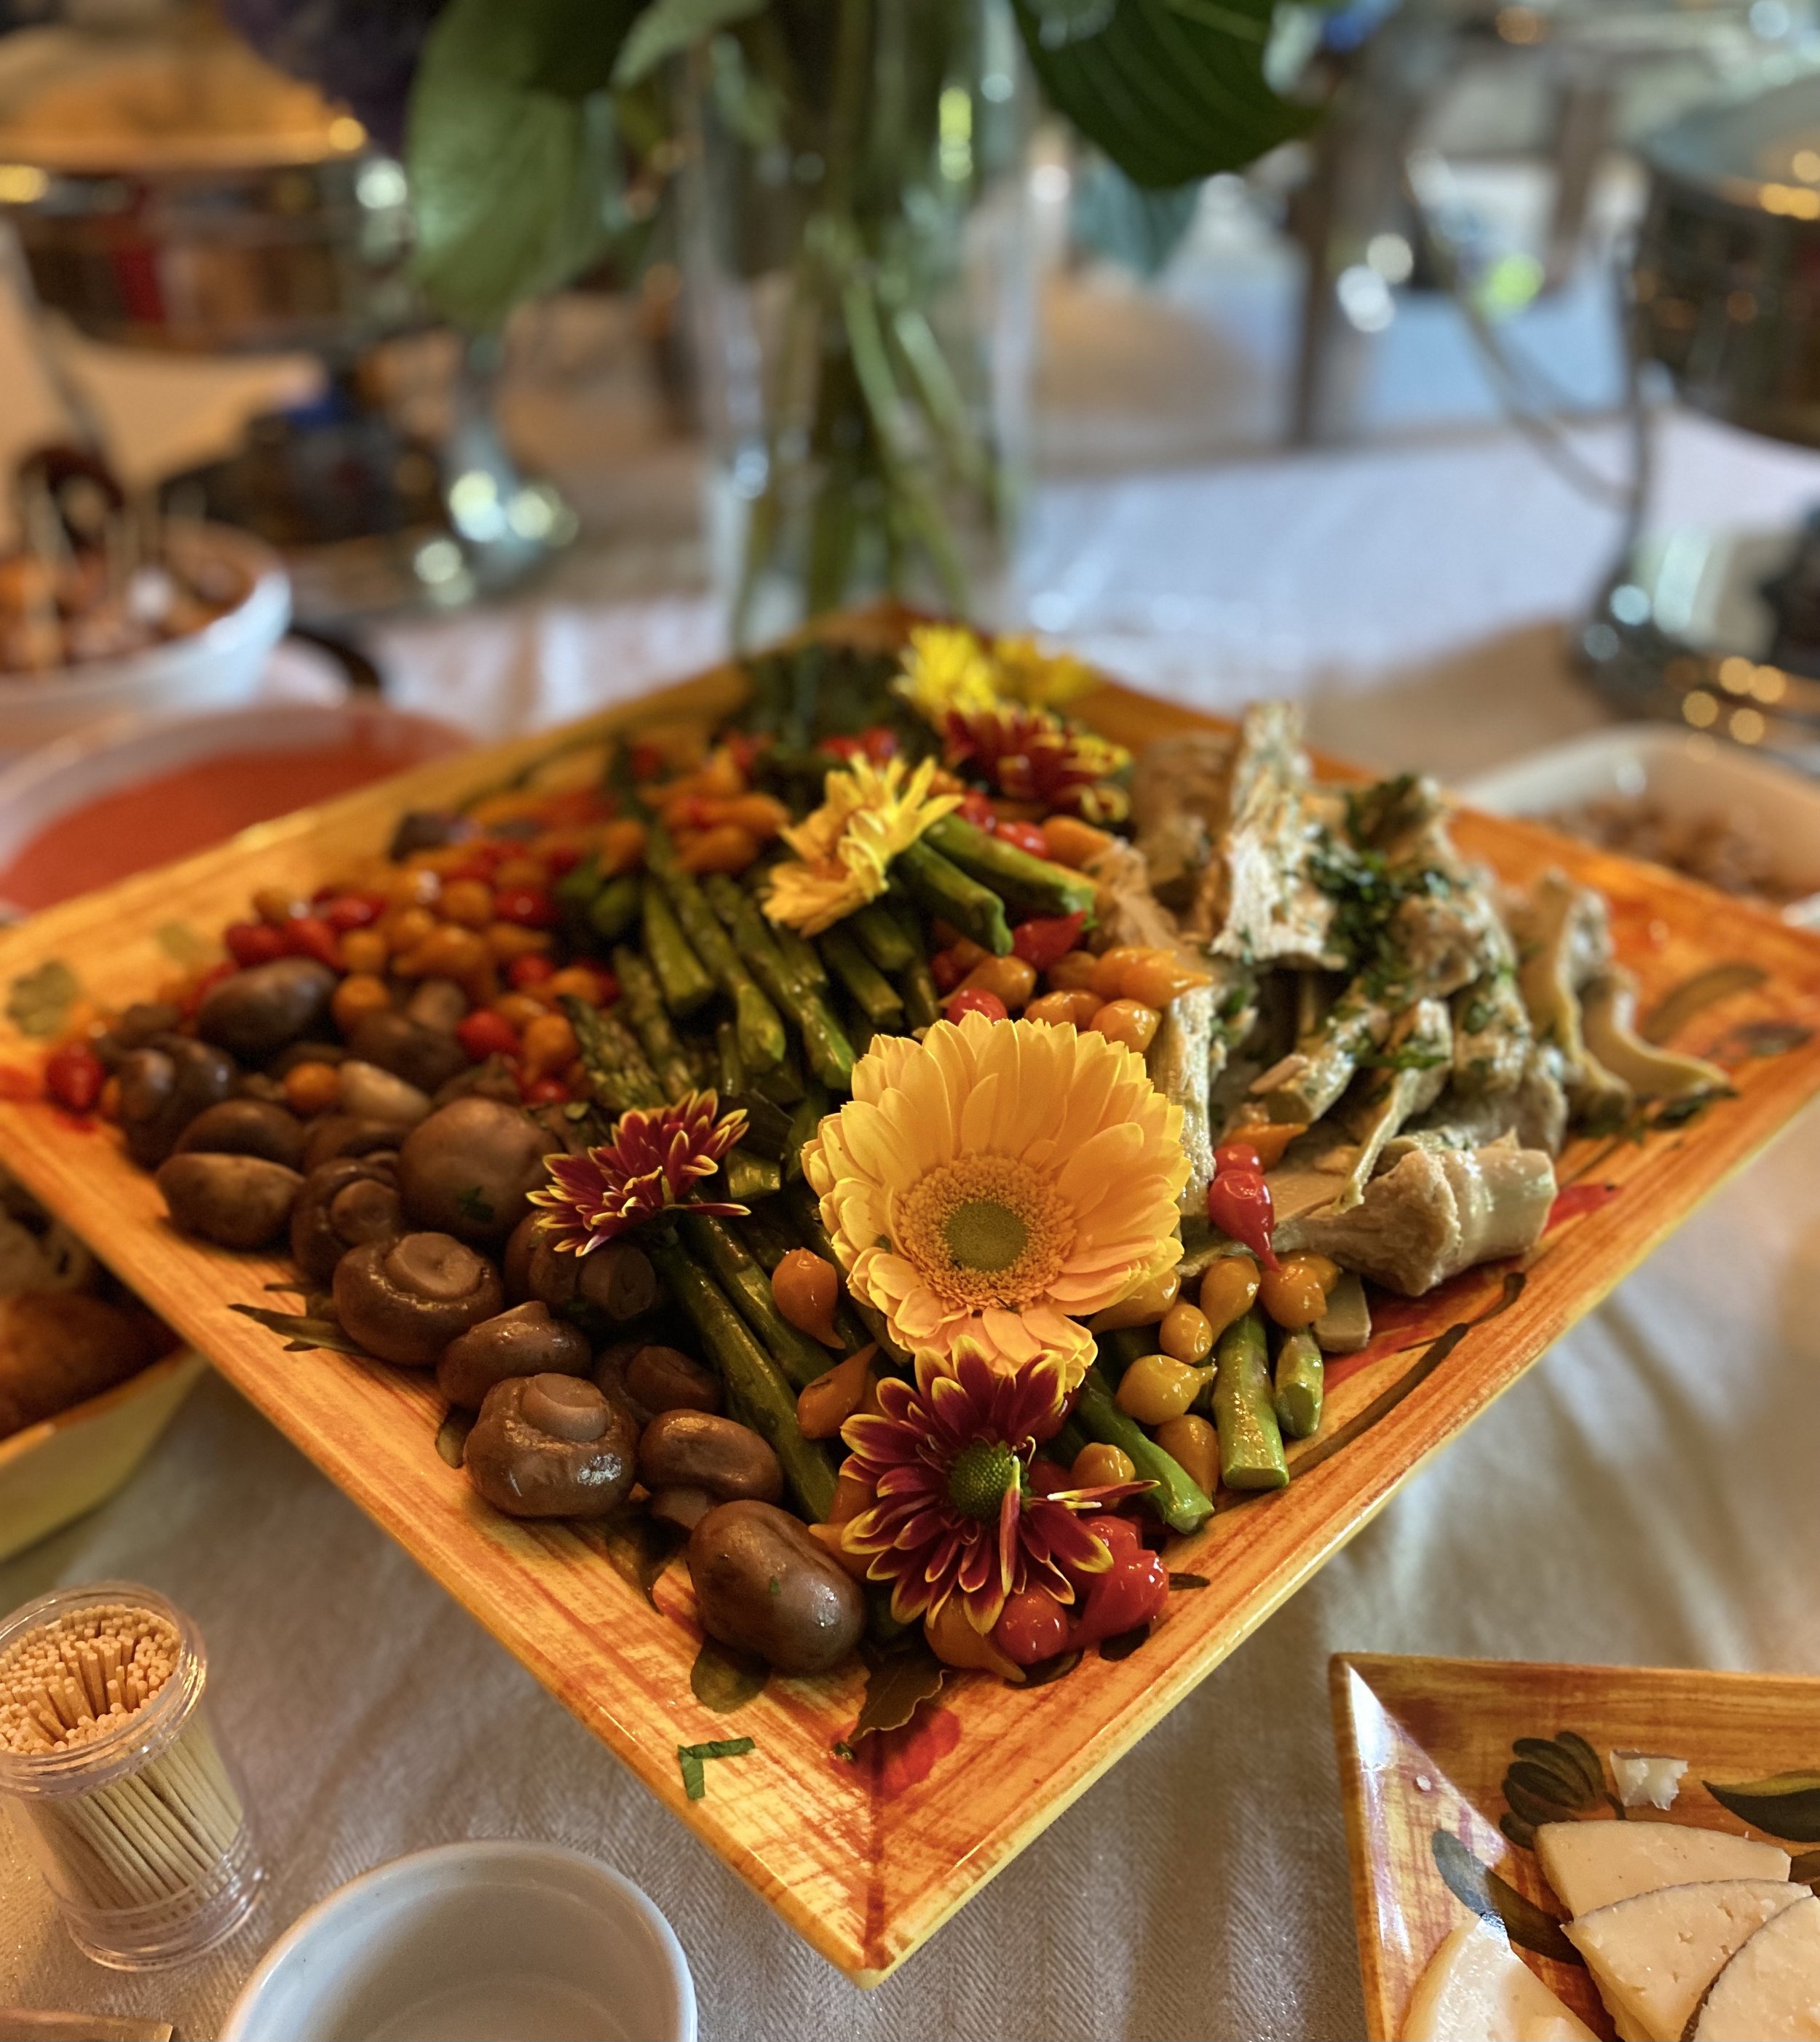 Gourmet Healthy-Eating Delight: Healthy Veggies by Eden Healthy Private Catering